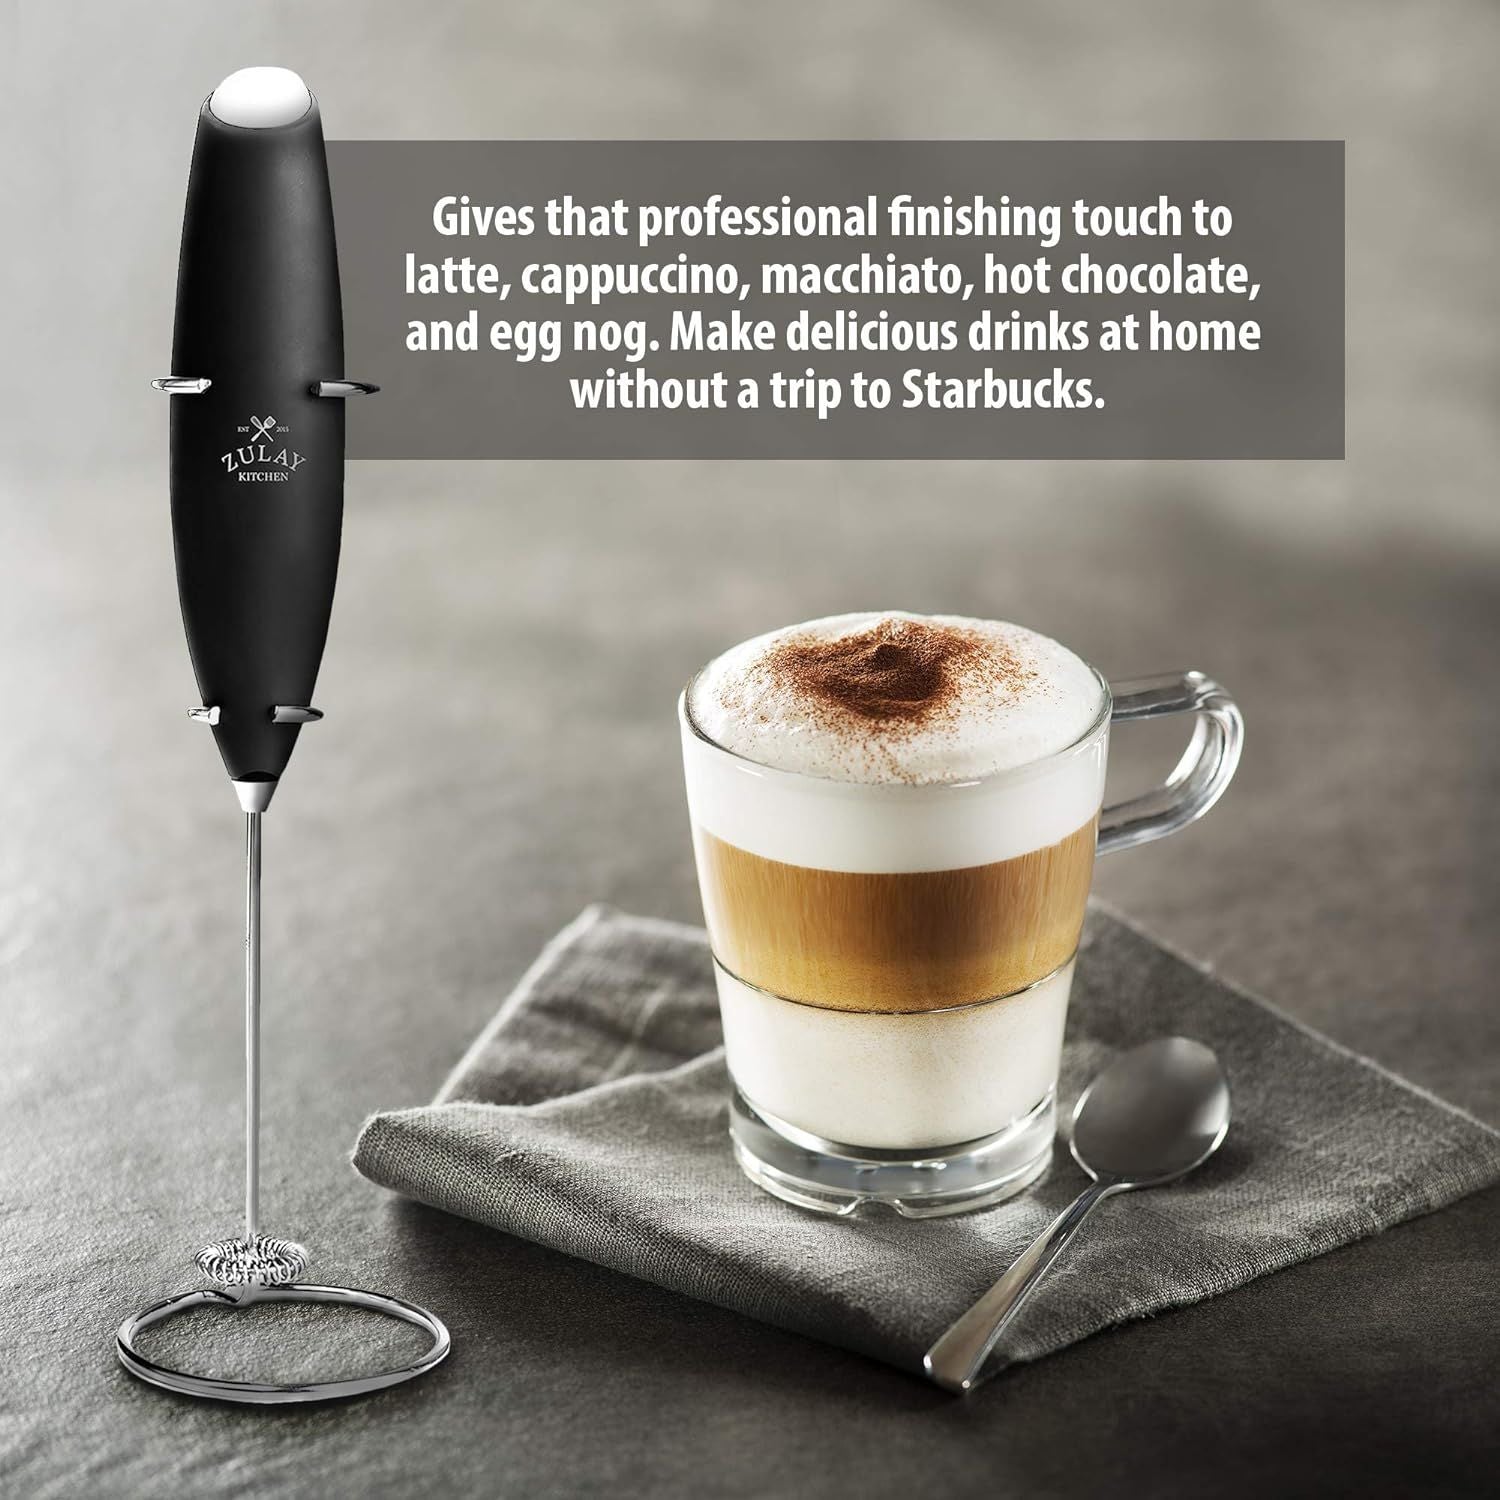 Zulay Kitchen Espresso Machine with Frother